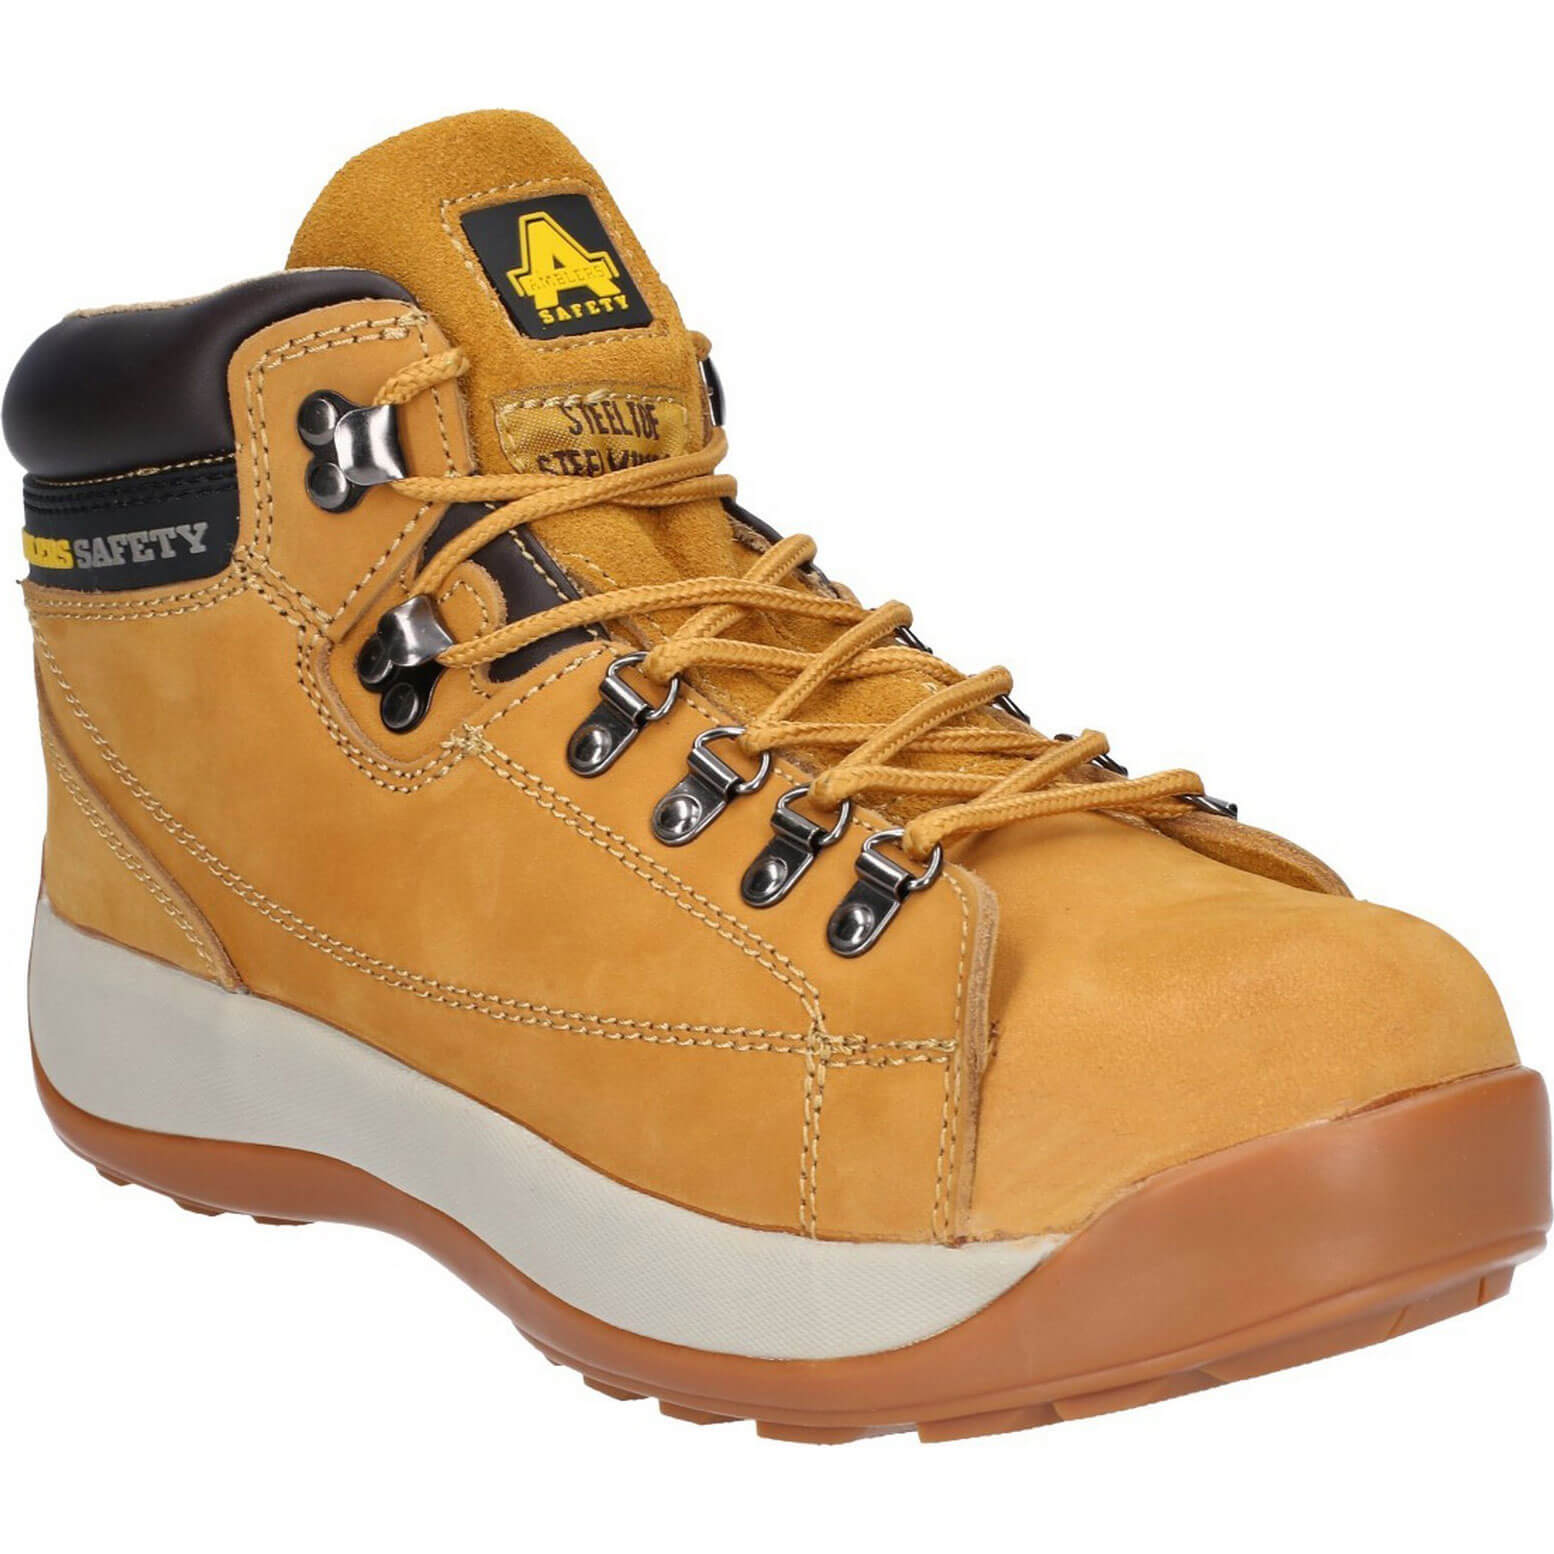 Photo of Amblers Mens Safety Fs122 Hardwearing Safety Boots Honey Size 11